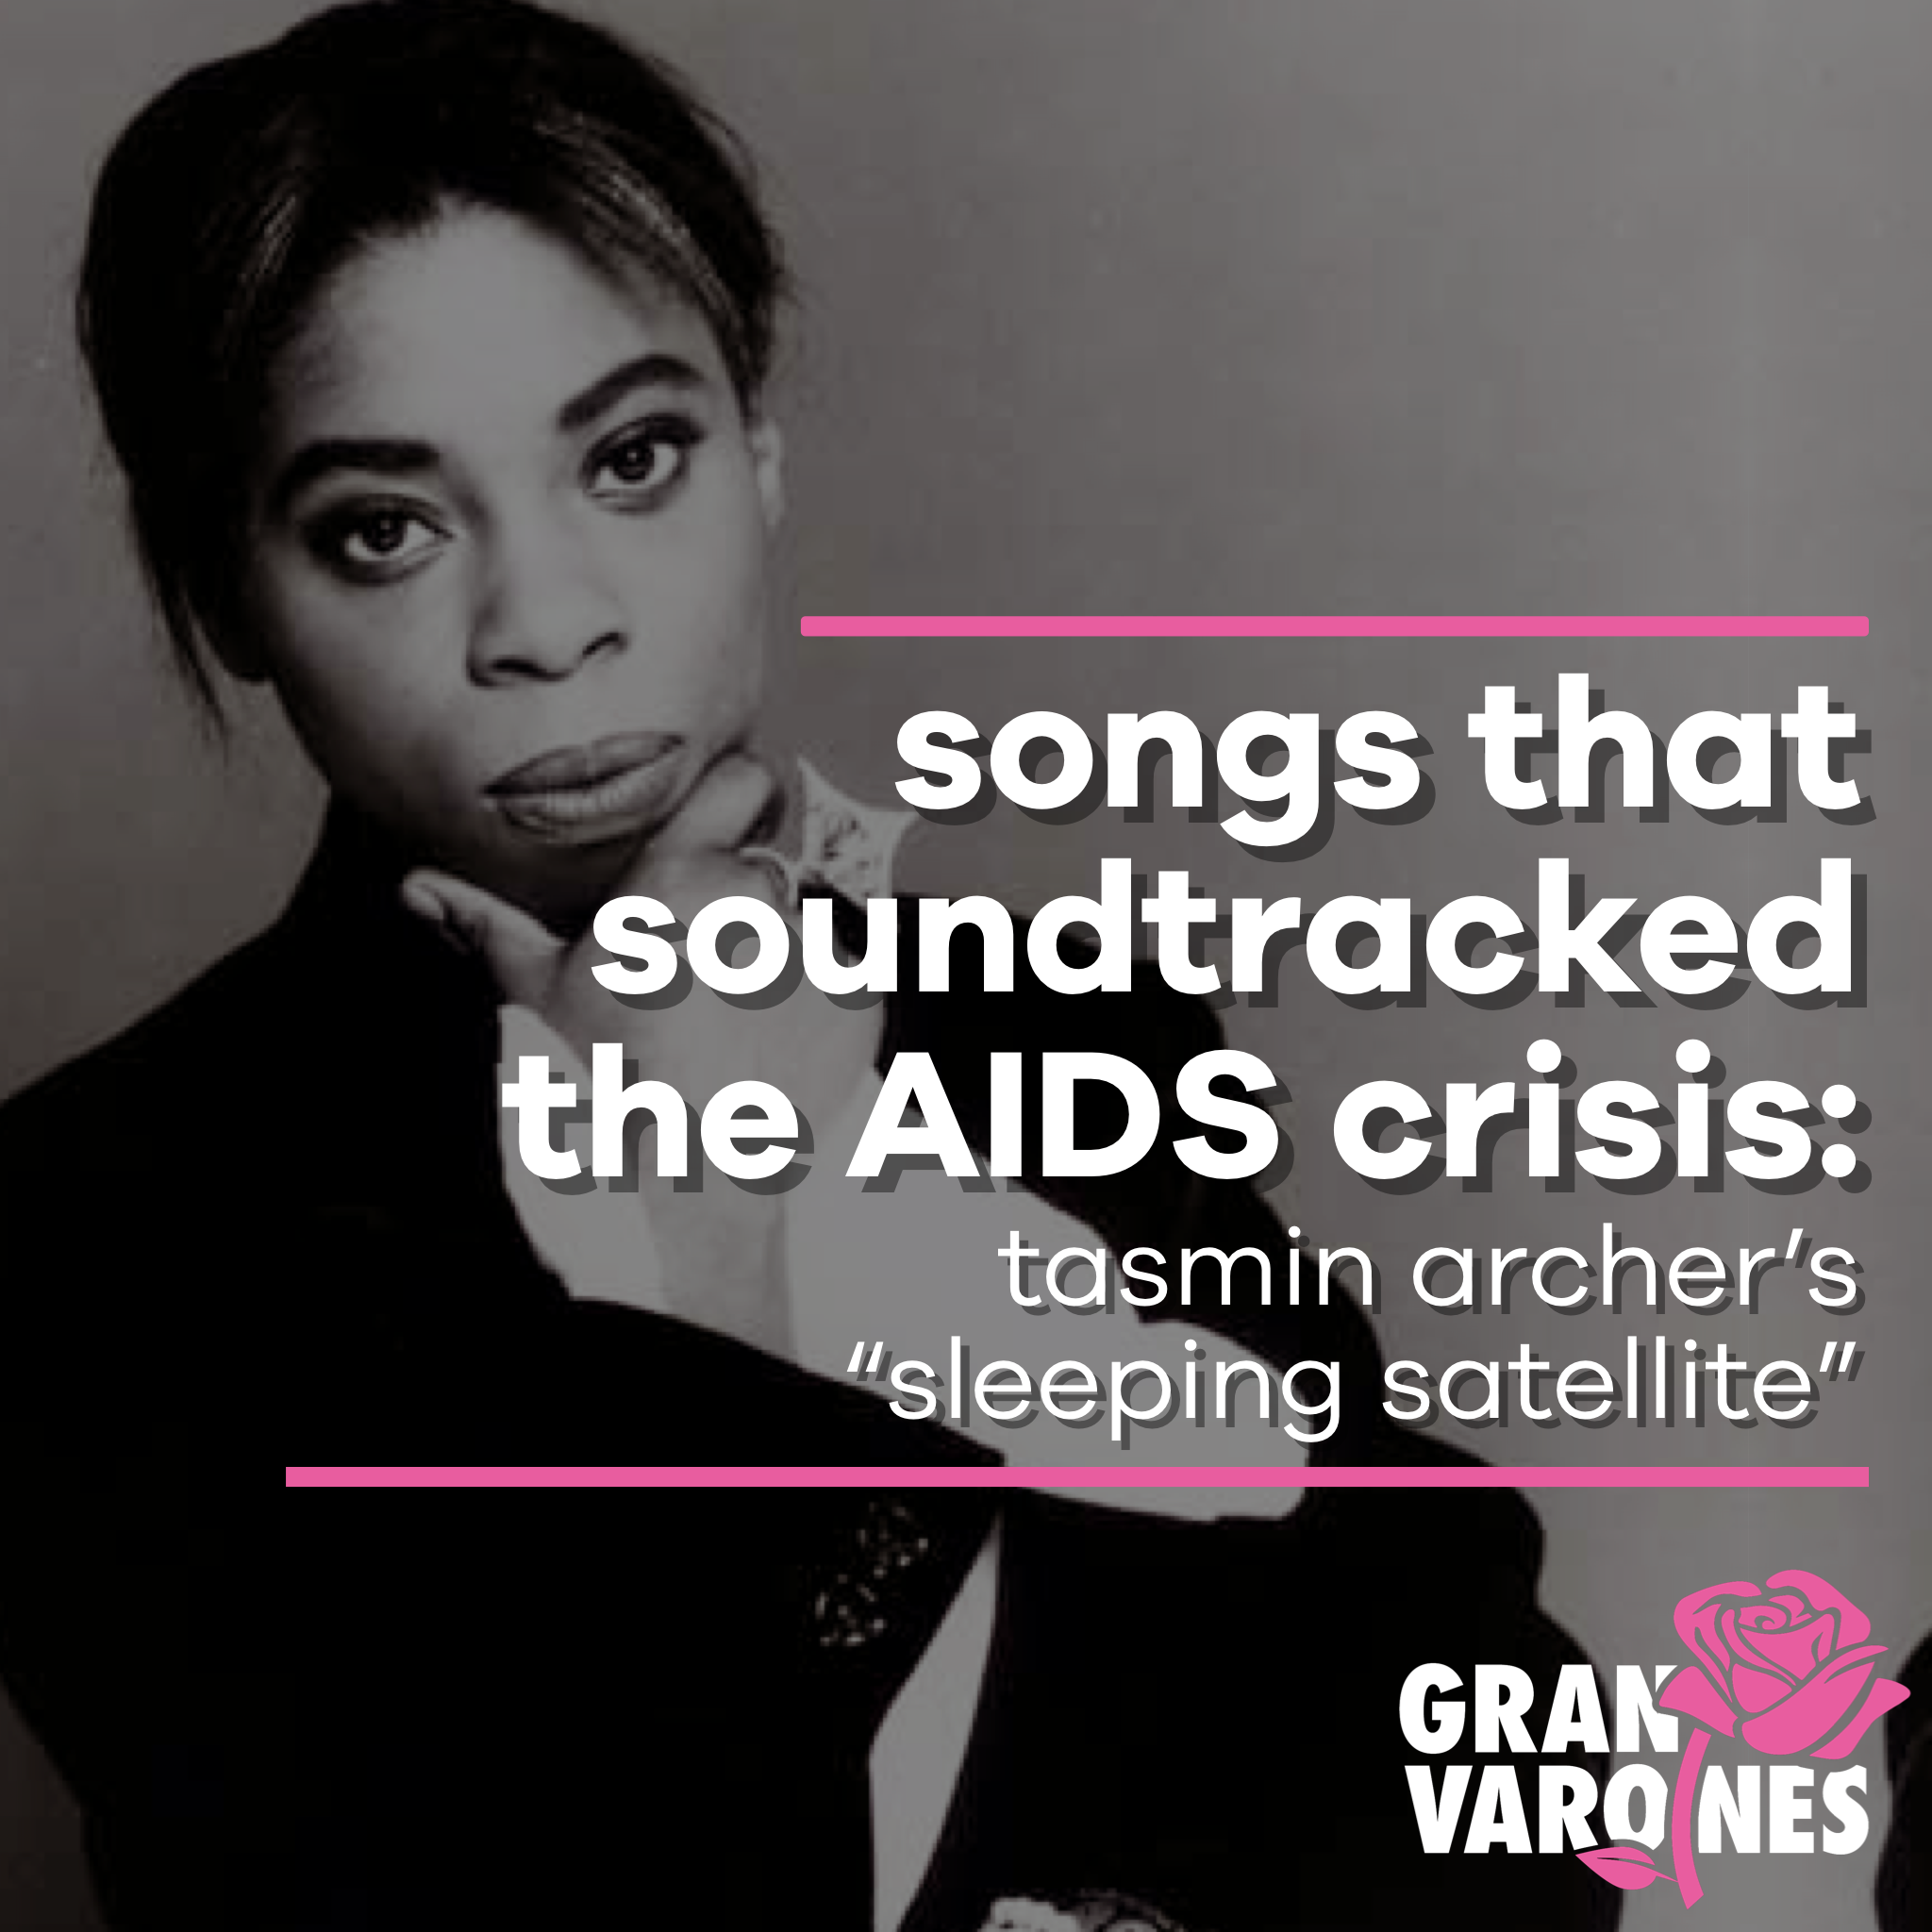 songs that soundtracked the AIDS crisis: tasmin archer’s “sleeping satellite”